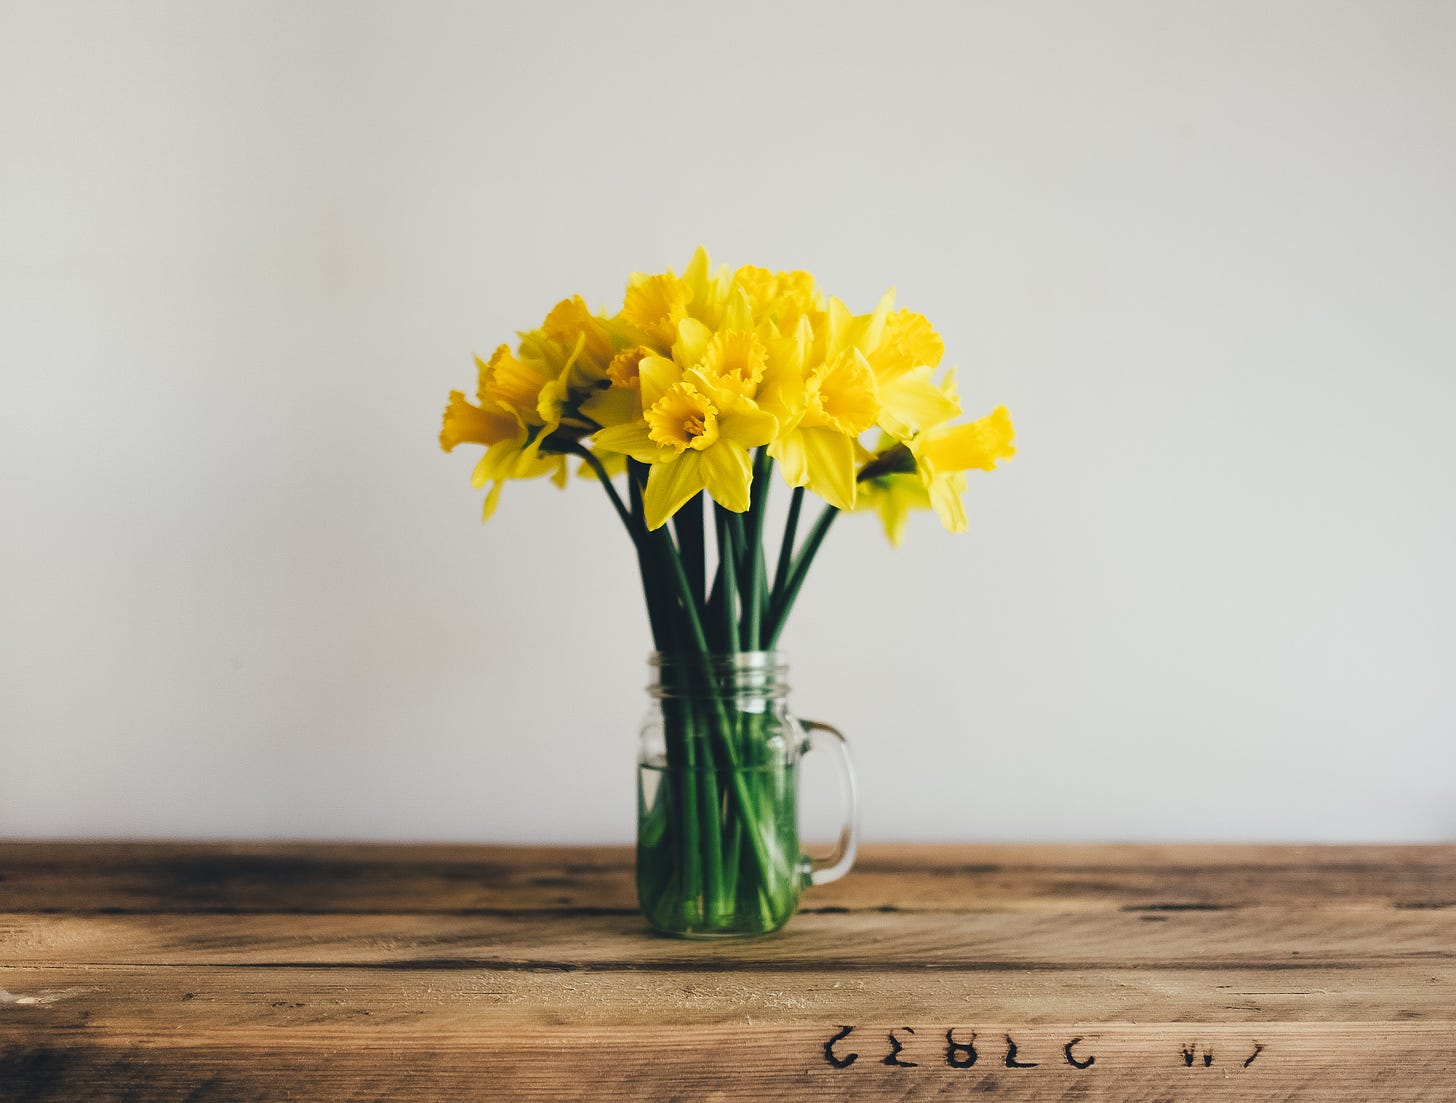 Yellow flowers with green stems sit in a clear glass mug serving as a vase. The table it sits on is made of brown wood. The wall behind the flowers is white.